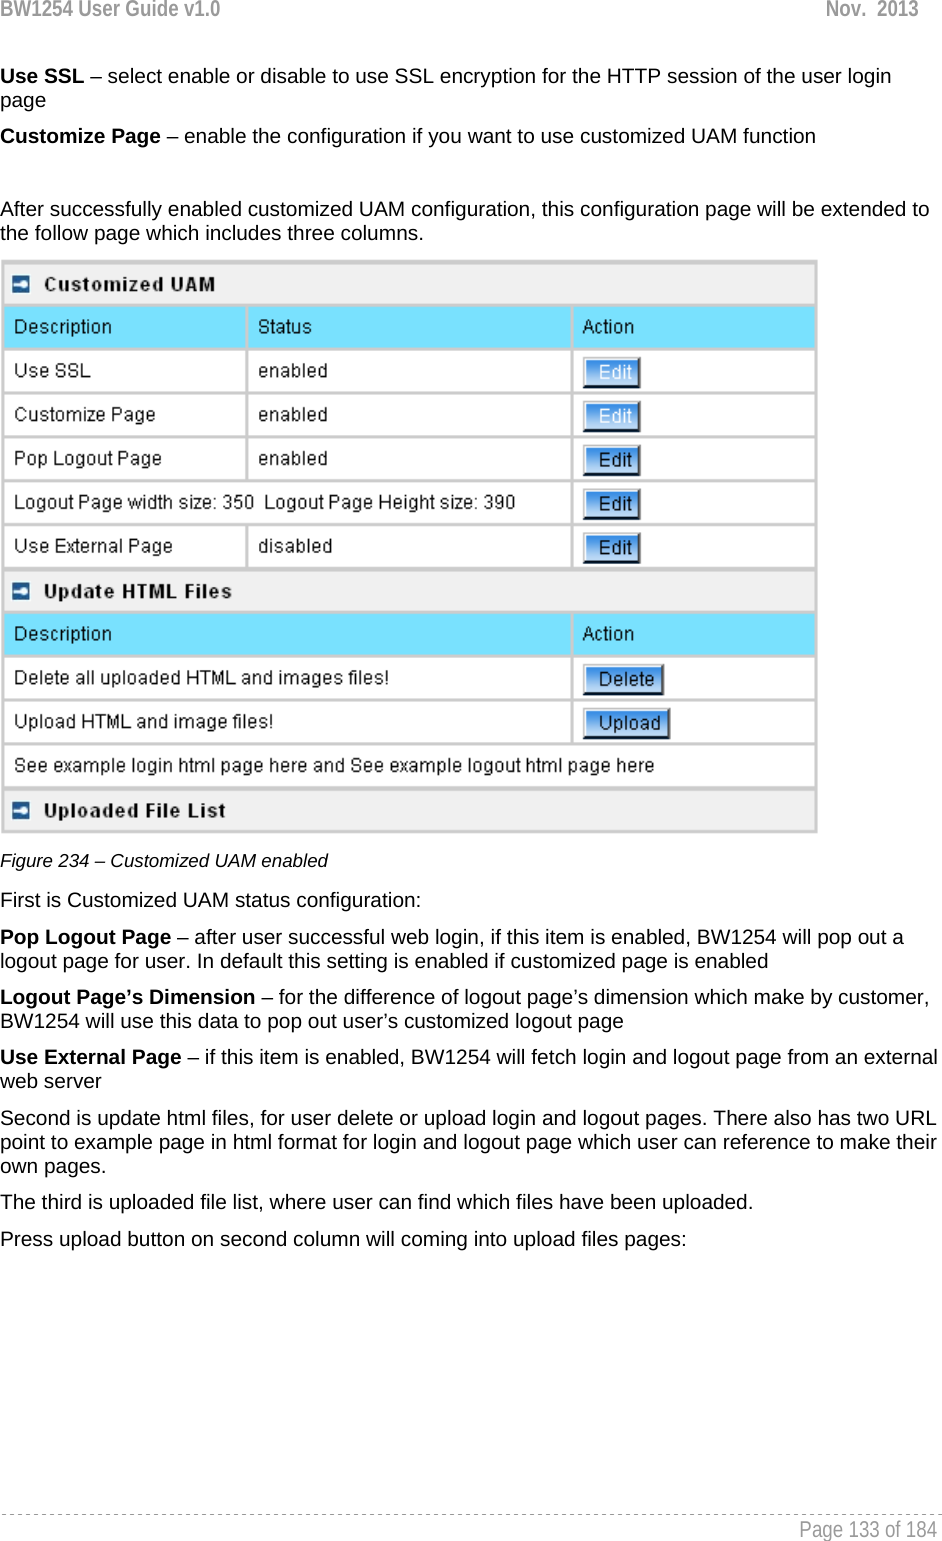 BW1254 User Guide v1.0  Nov.  2013     Page 133 of 184   Use SSL – select enable or disable to use SSL encryption for the HTTP session of the user login page Customize Page – enable the configuration if you want to use customized UAM function  After successfully enabled customized UAM configuration, this configuration page will be extended to the follow page which includes three columns.  Figure 234 – Customized UAM enabled First is Customized UAM status configuration: Pop Logout Page – after user successful web login, if this item is enabled, BW1254 will pop out a logout page for user. In default this setting is enabled if customized page is enabled Logout Page’s Dimension – for the difference of logout page’s dimension which make by customer, BW1254 will use this data to pop out user’s customized logout page Use External Page – if this item is enabled, BW1254 will fetch login and logout page from an external web server Second is update html files, for user delete or upload login and logout pages. There also has two URL point to example page in html format for login and logout page which user can reference to make their own pages. The third is uploaded file list, where user can find which files have been uploaded. Press upload button on second column will coming into upload files pages: 